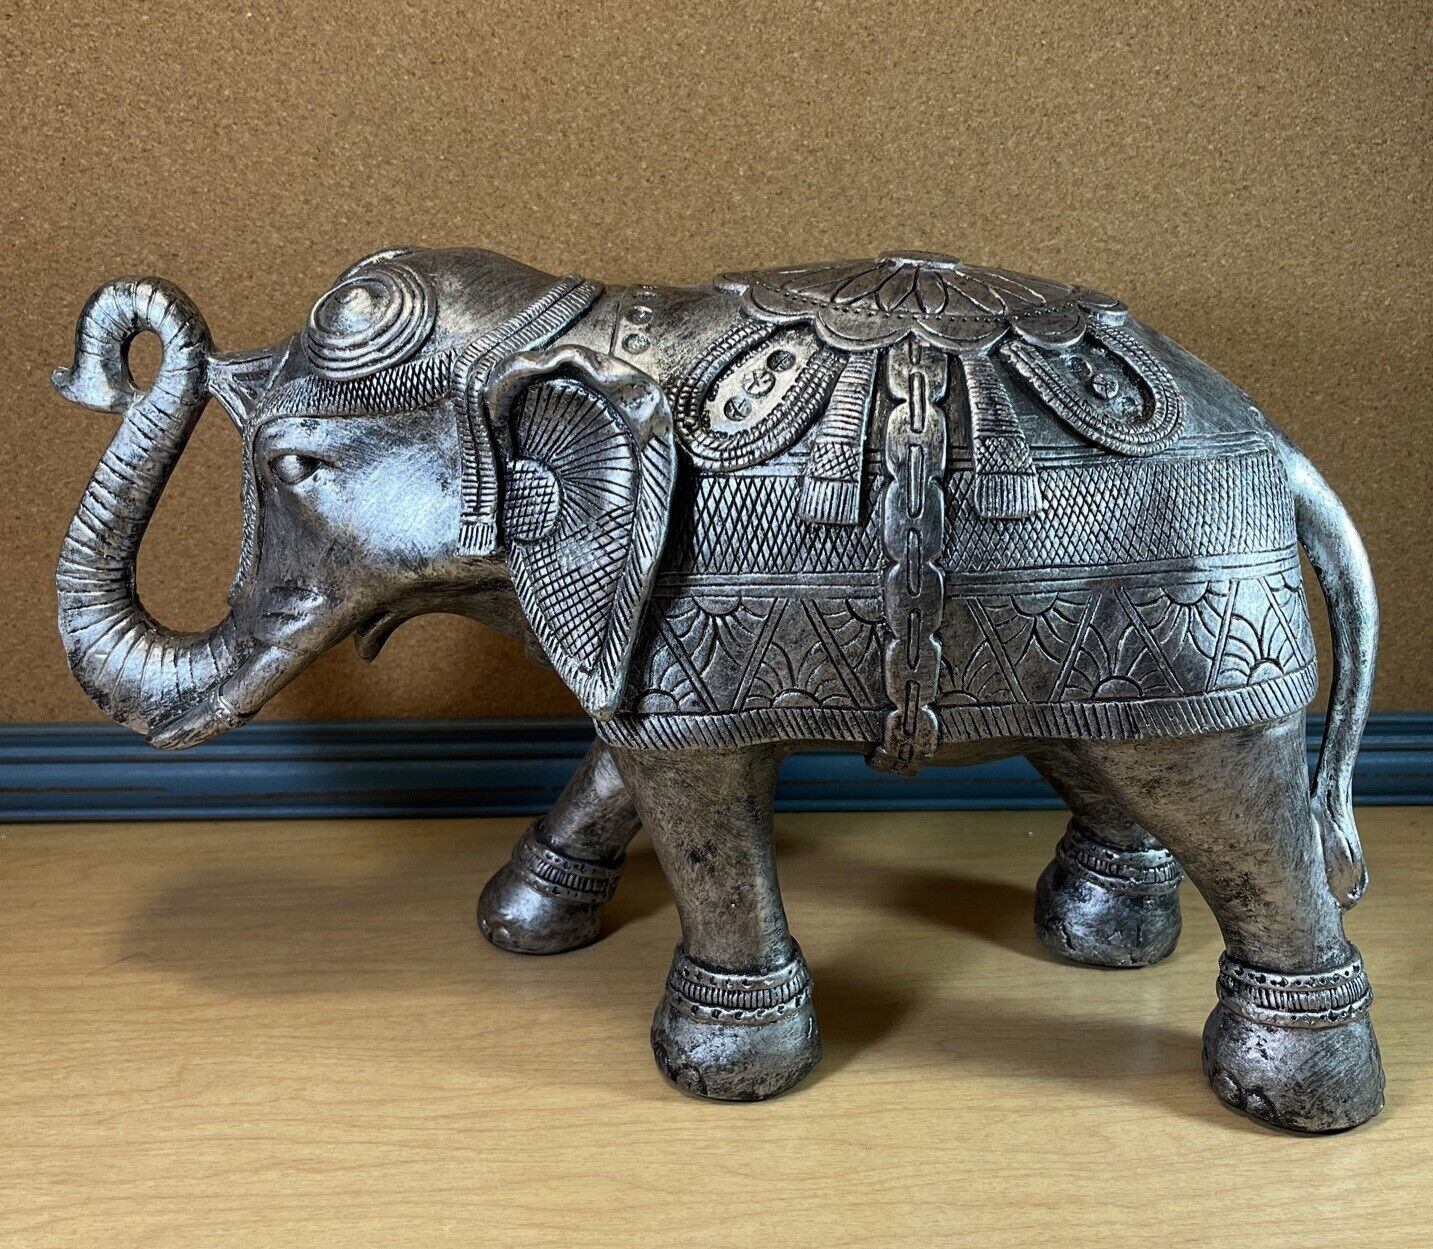 Large Elephant Statue 17 X 9 Inch Approximately  Silver Colored Heavy Plastic